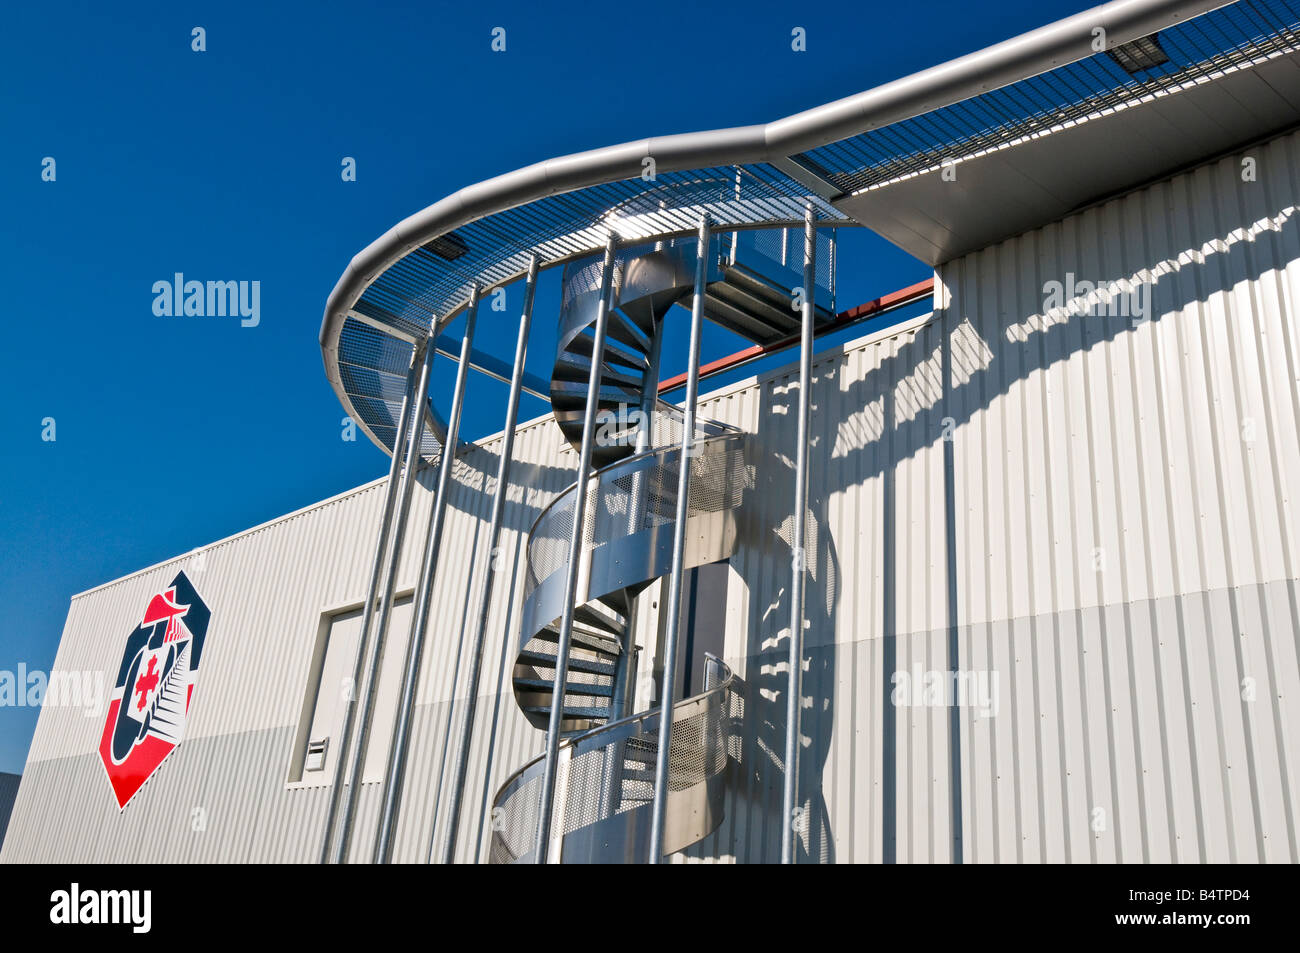 Spiral staircase outside "Les Mousquetaires" superstore, France. Stock Photo